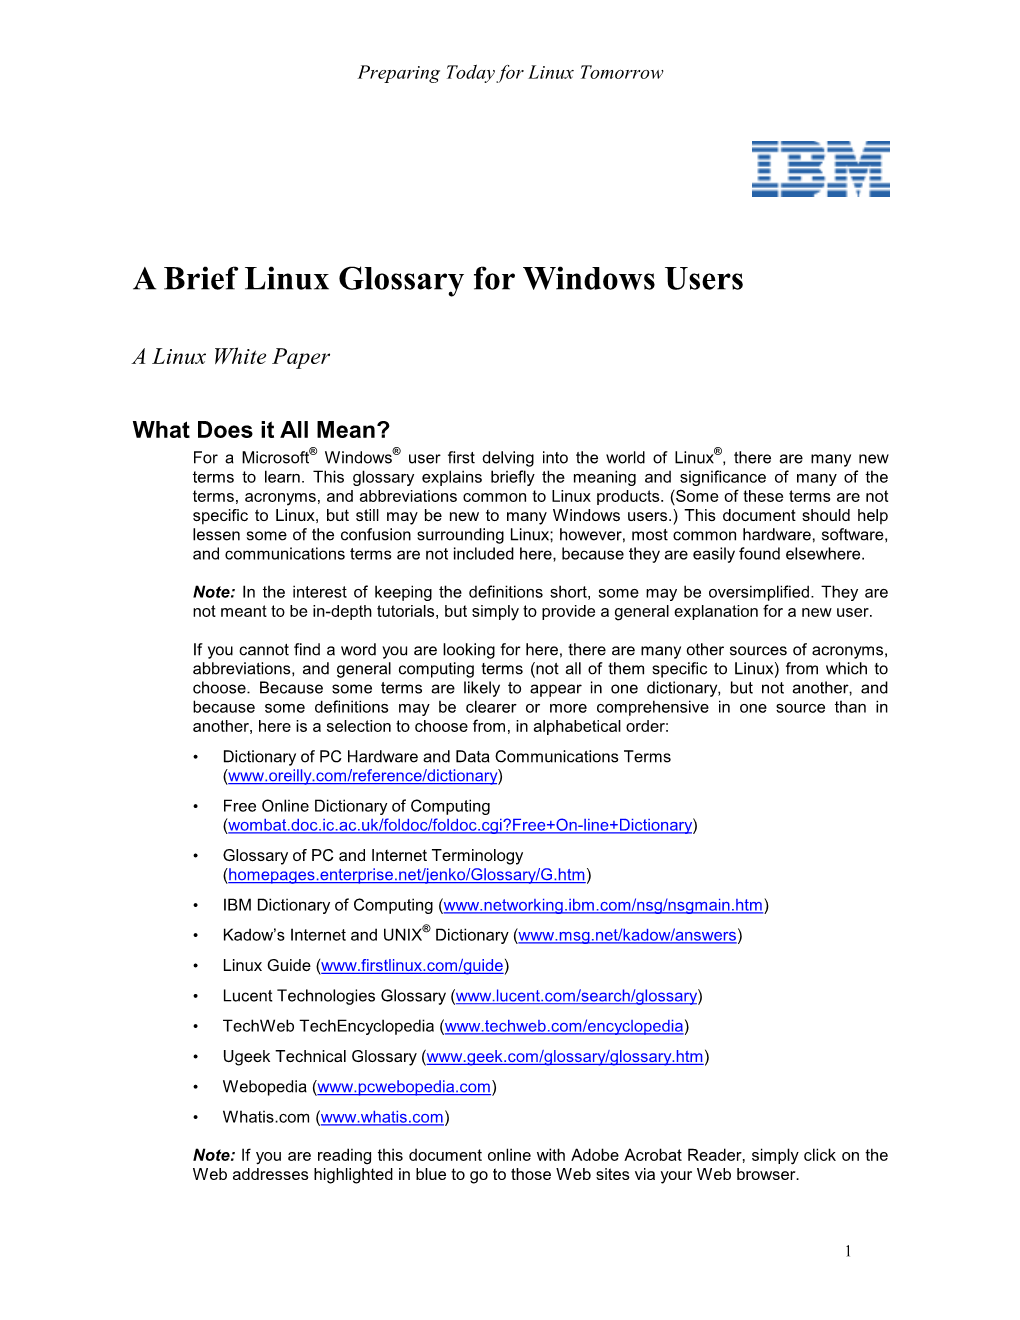 A Brief Linux Glossary for Windows Users